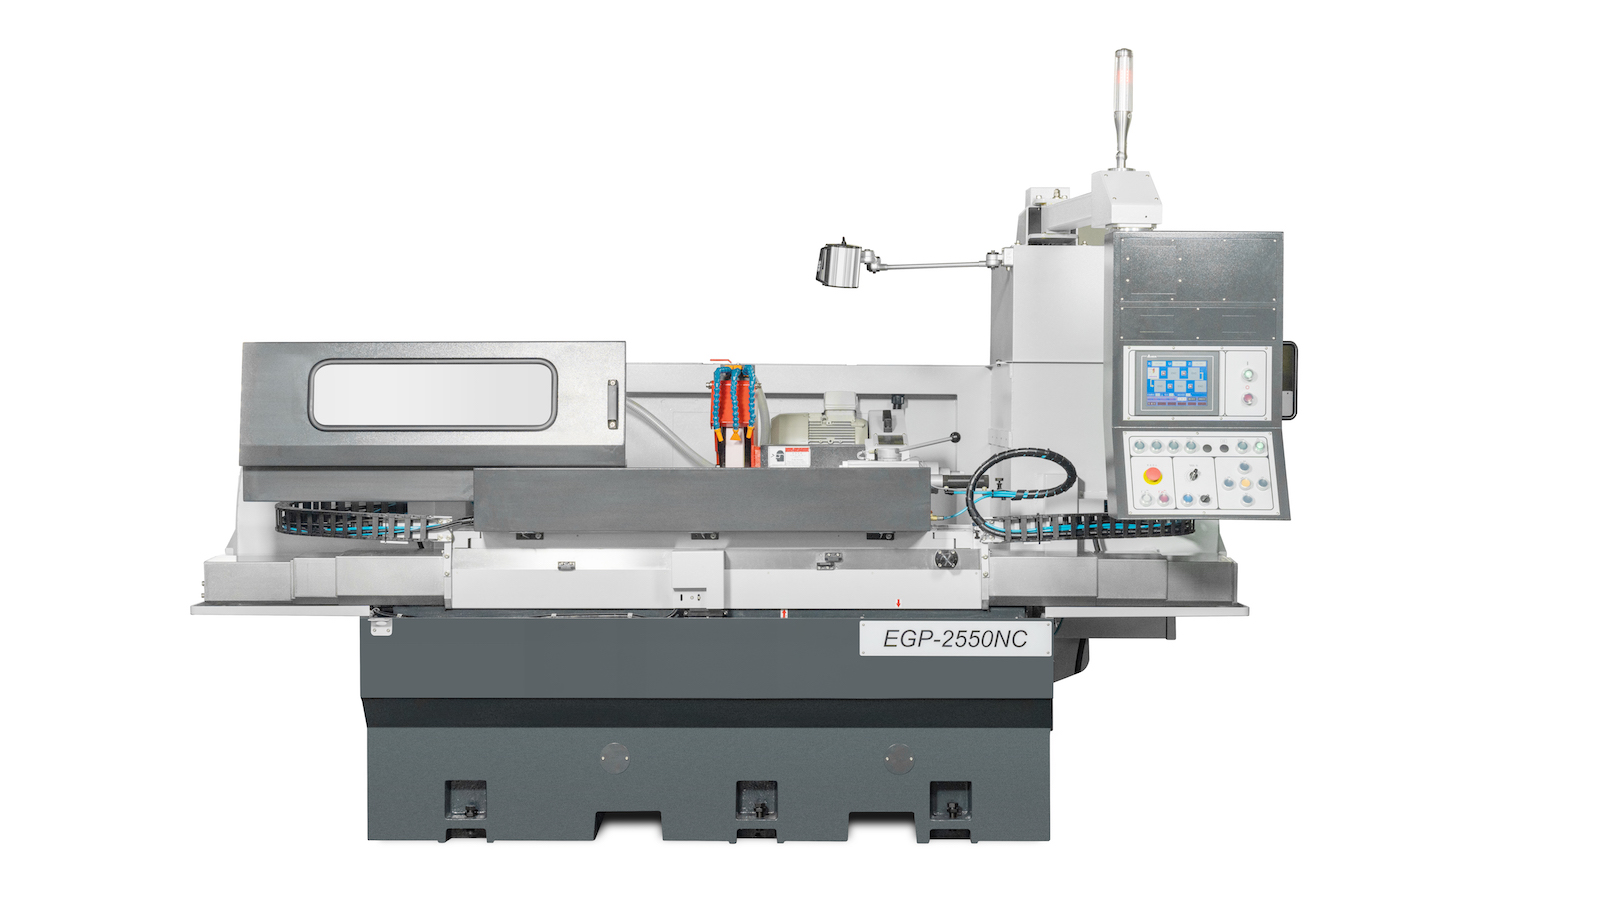 Suppliers of High Precision Grinding Equipment UK